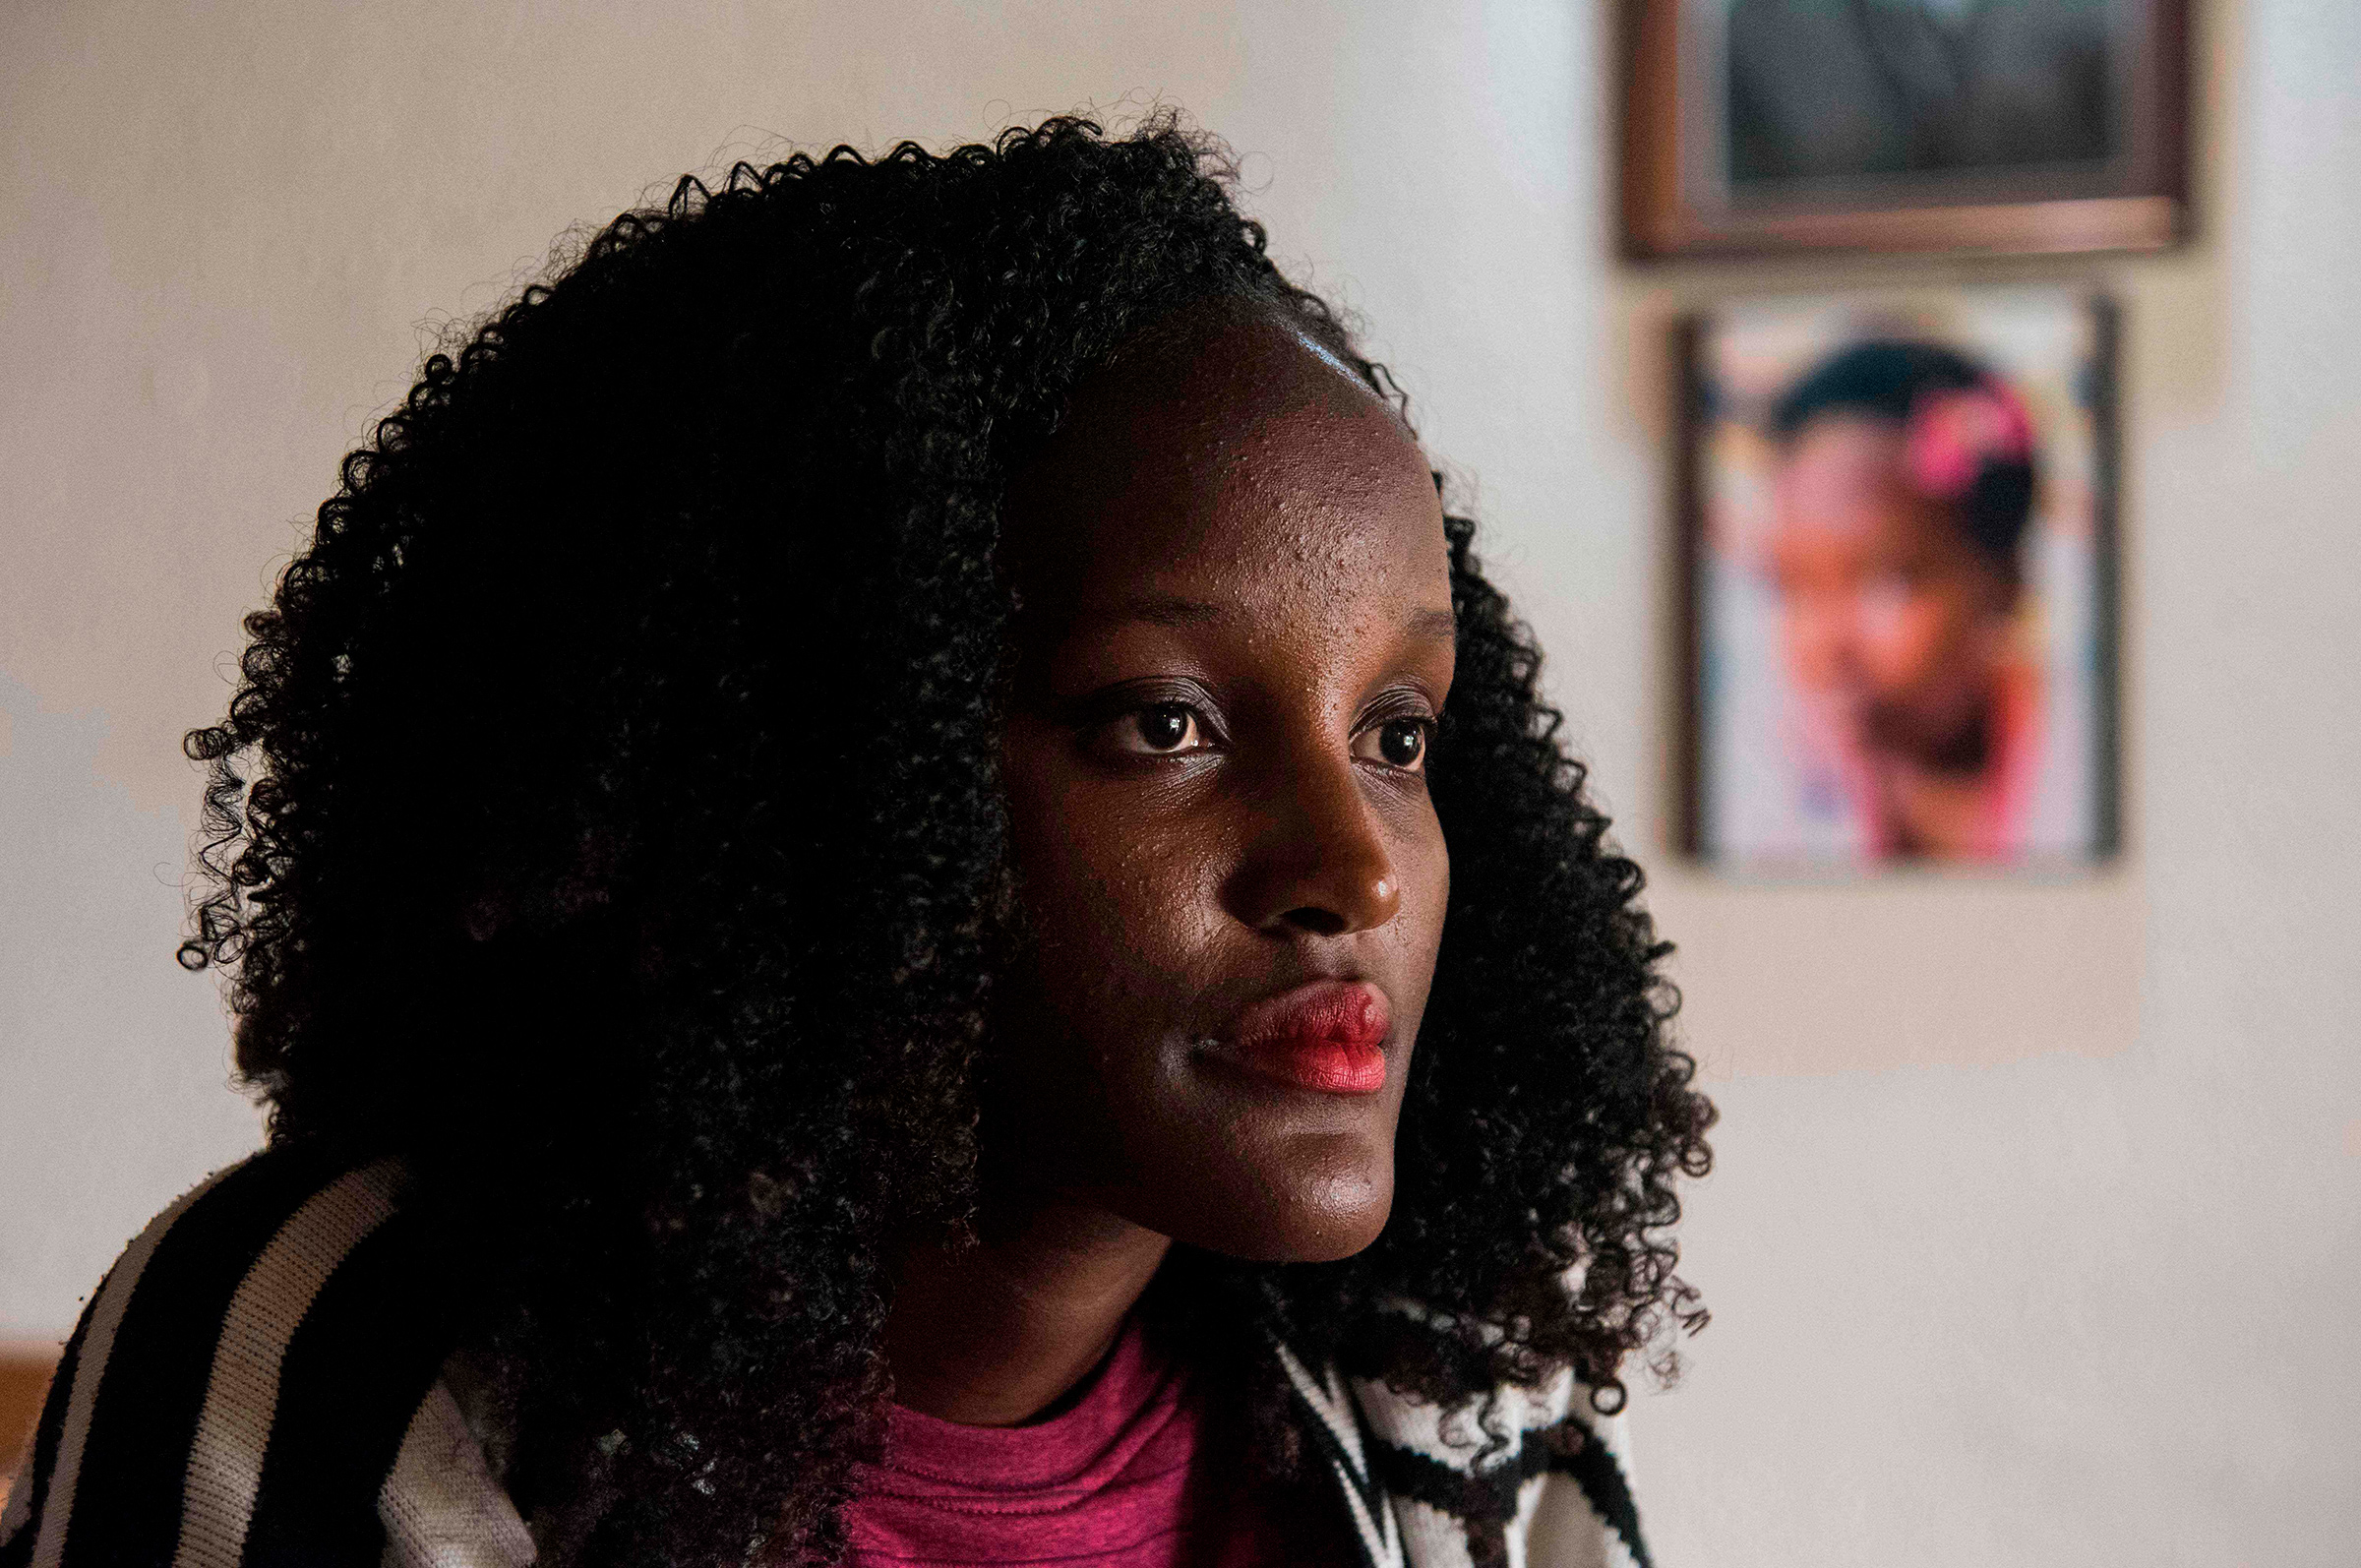 Nakate photographed at her home in Kampala (Isaac Kasamani—AFP/Getty Images)